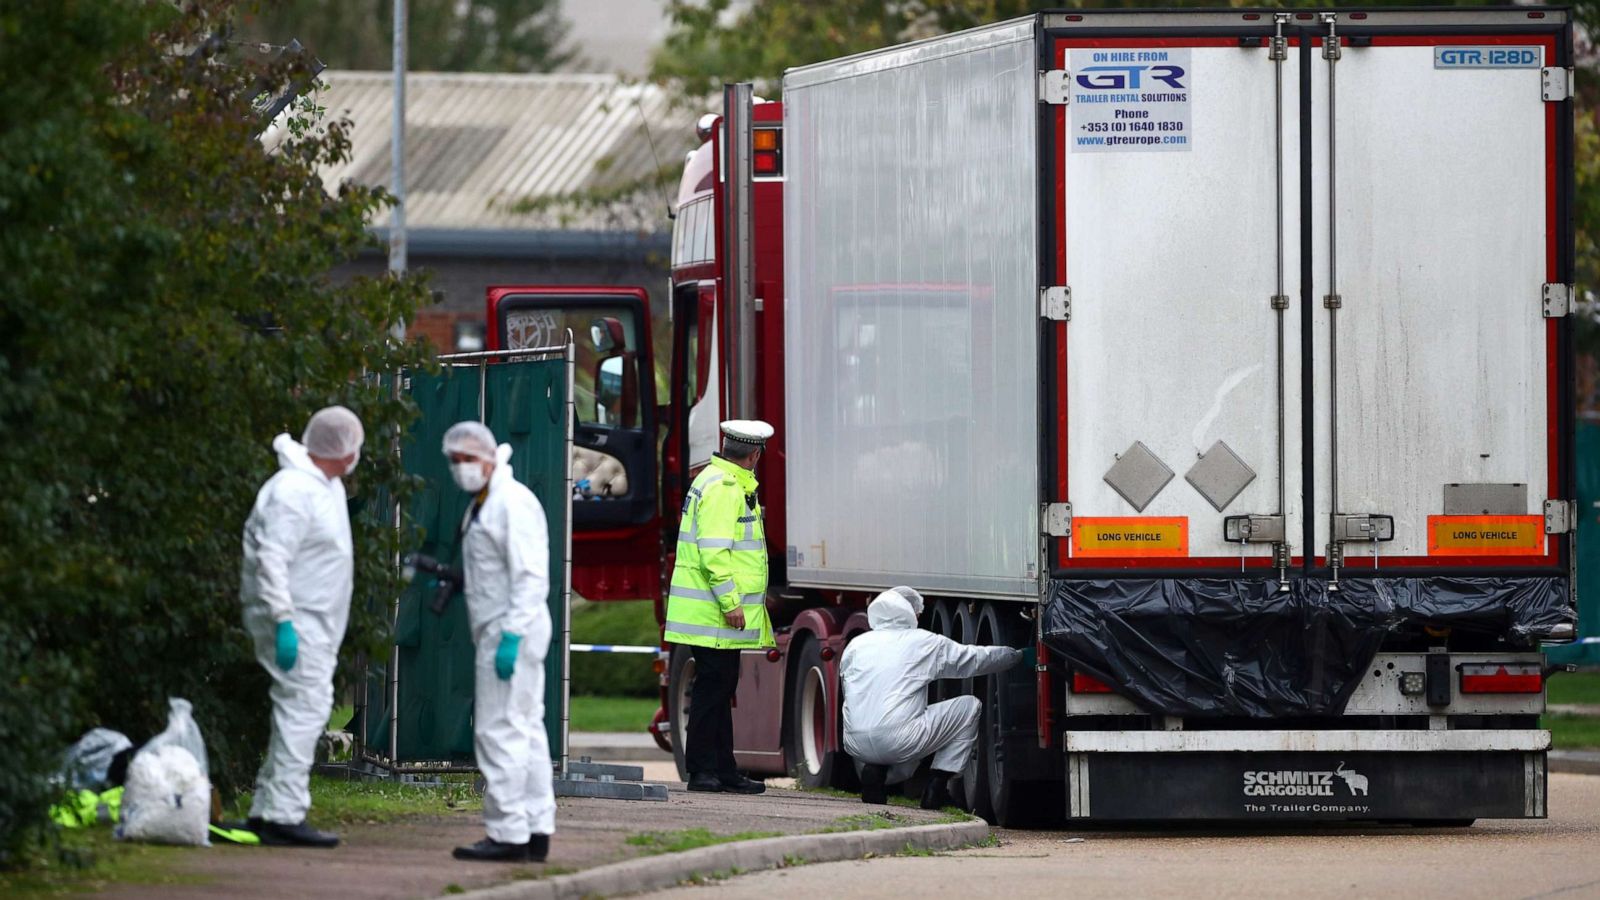 Vietnamese police arrest 8 suspects in connection with grisly discovery of 39 bodies in tractor-trailer in UK